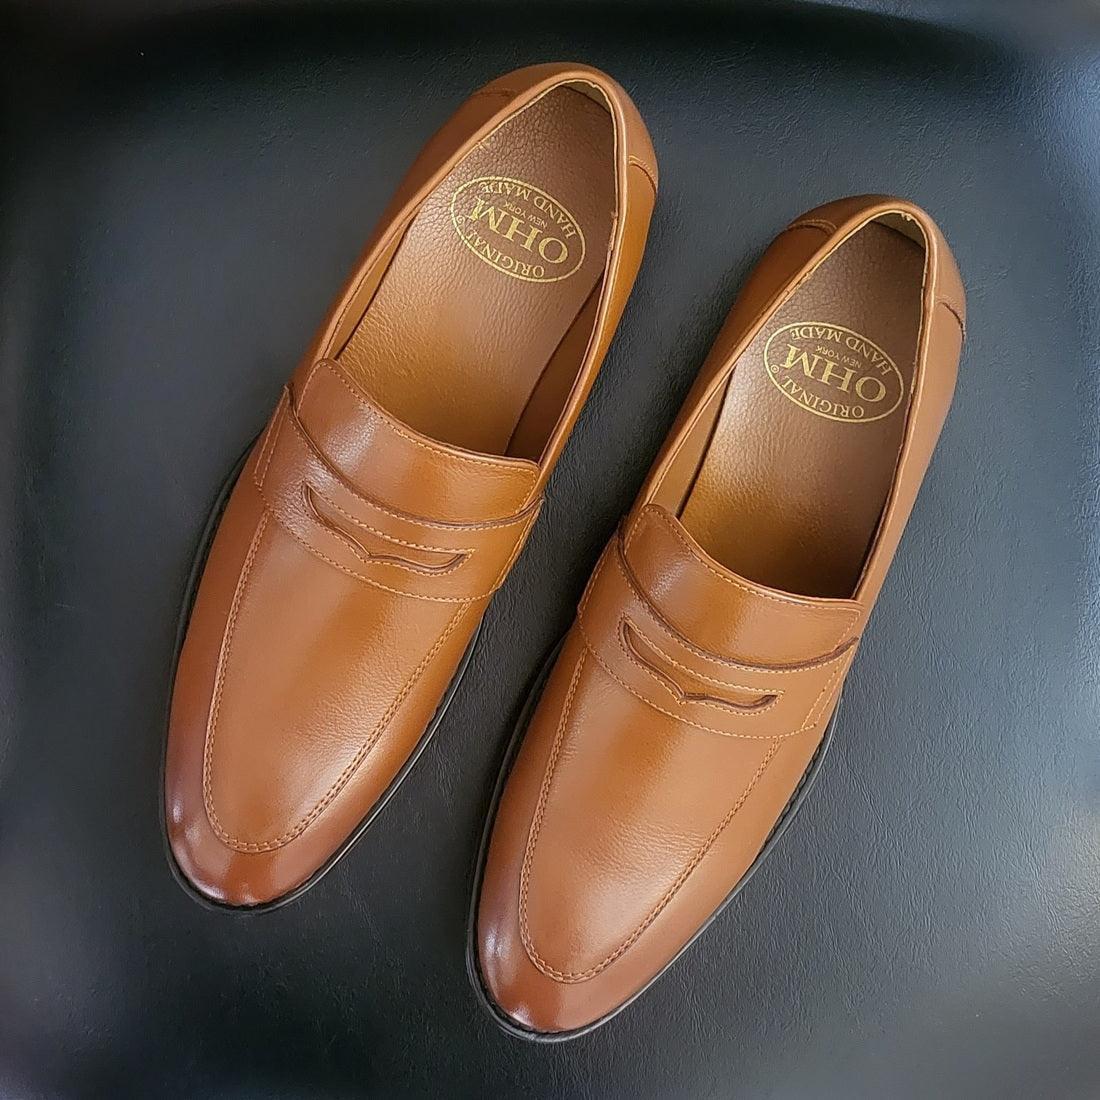 OHM New York Soft Grained Leather Double Stitched Penny Loafer Shoes